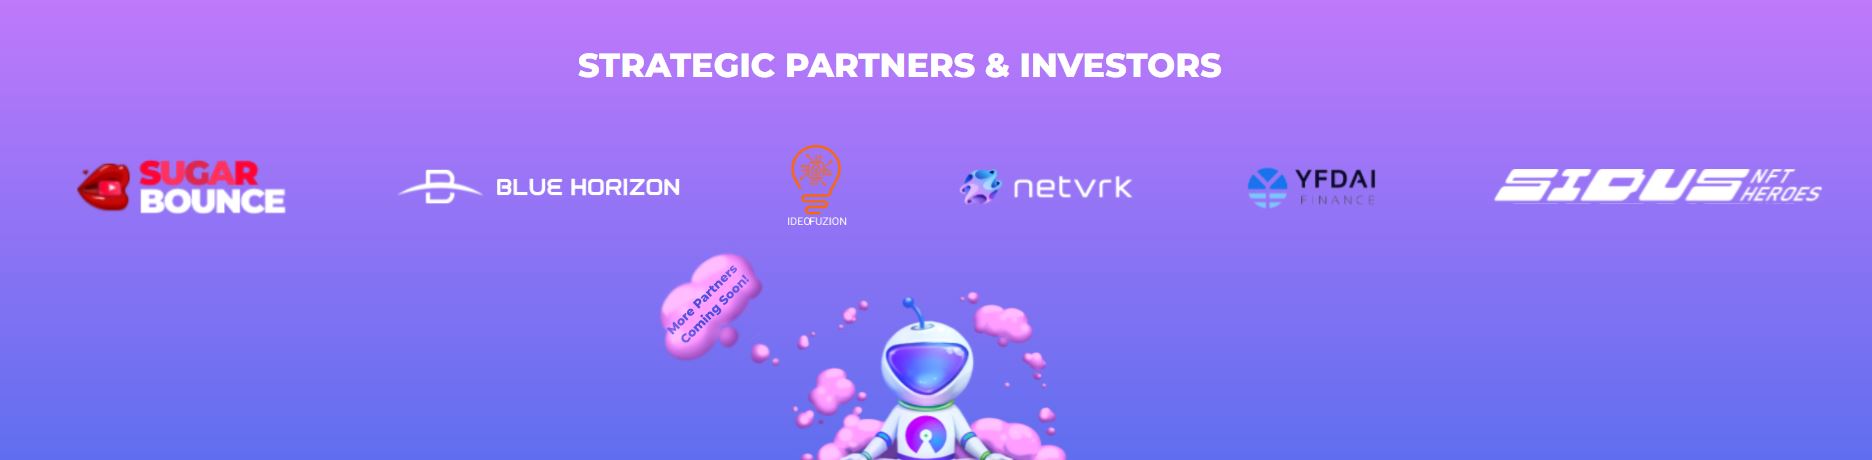 govworld partners and investors